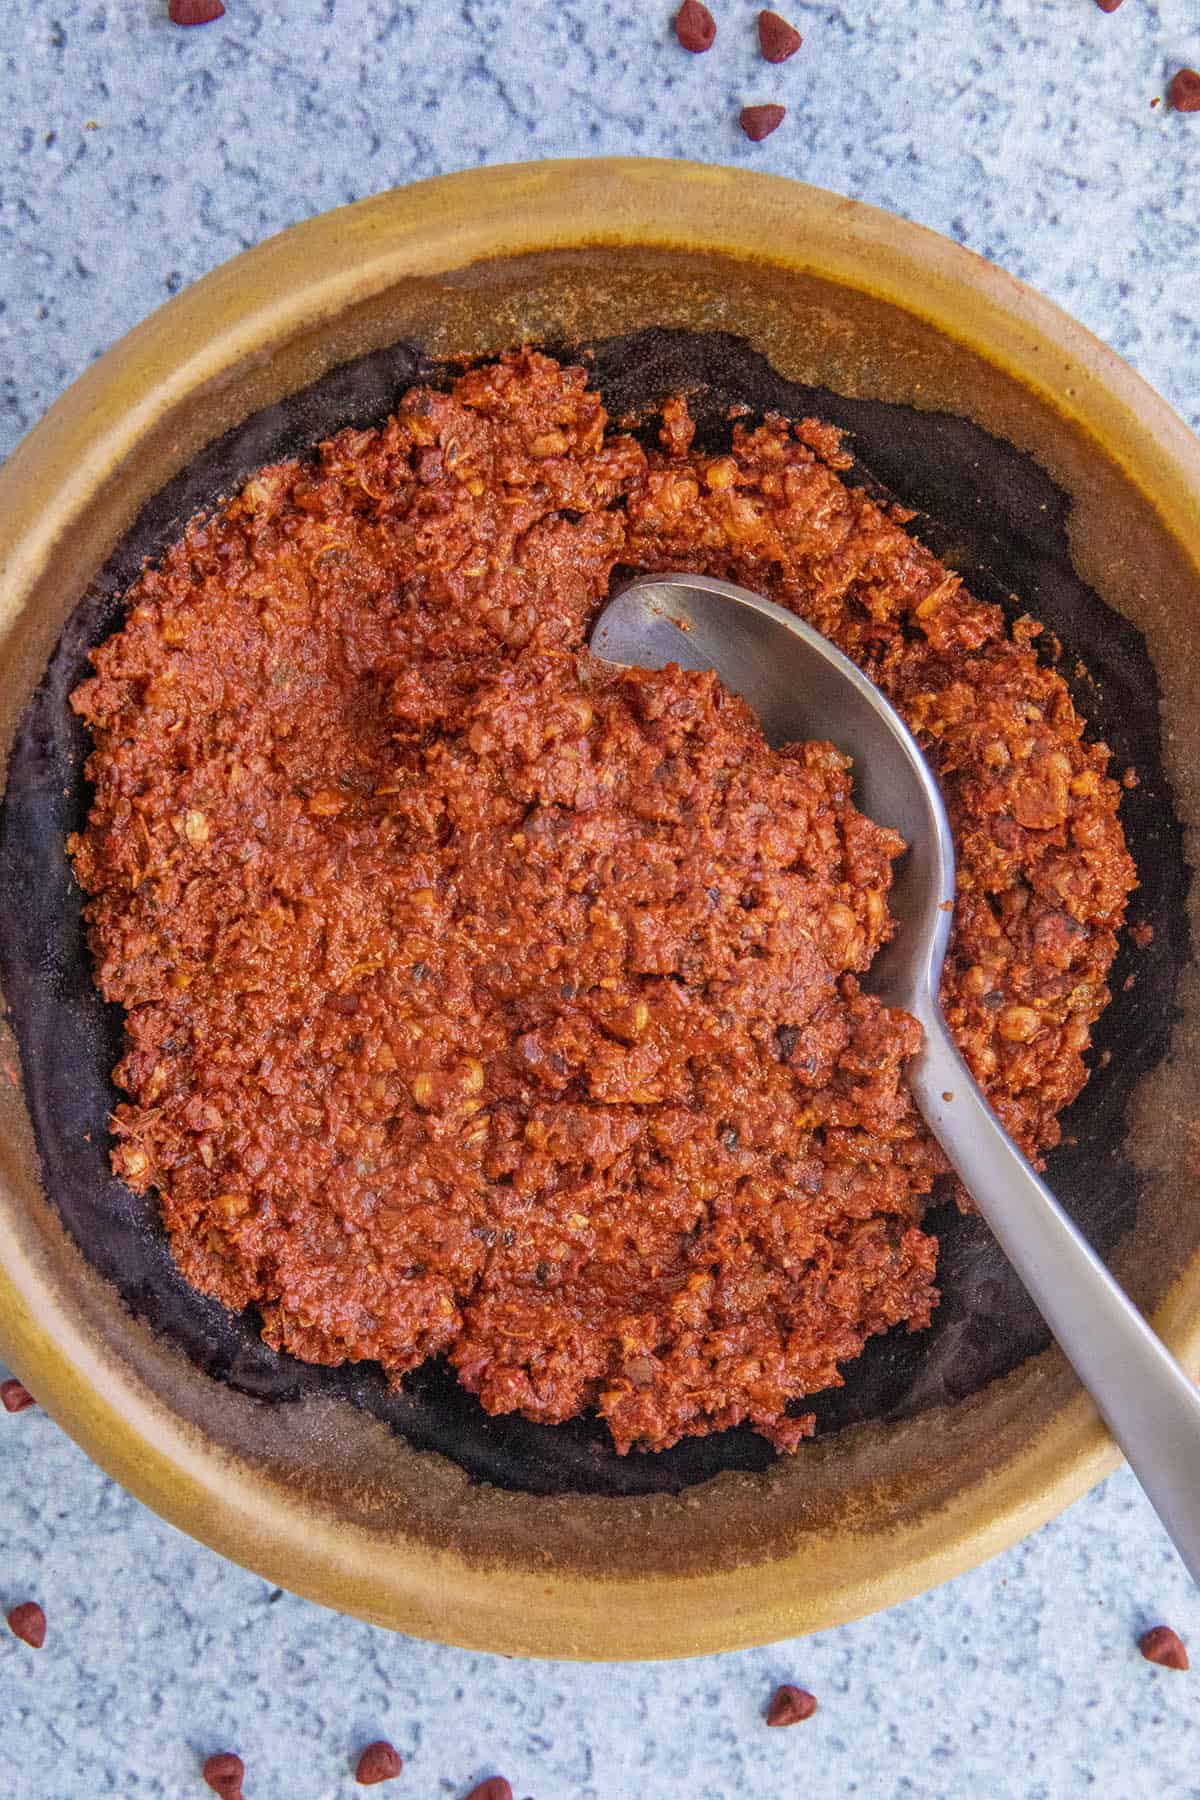 Achiote Paste in a bowl, ready to use